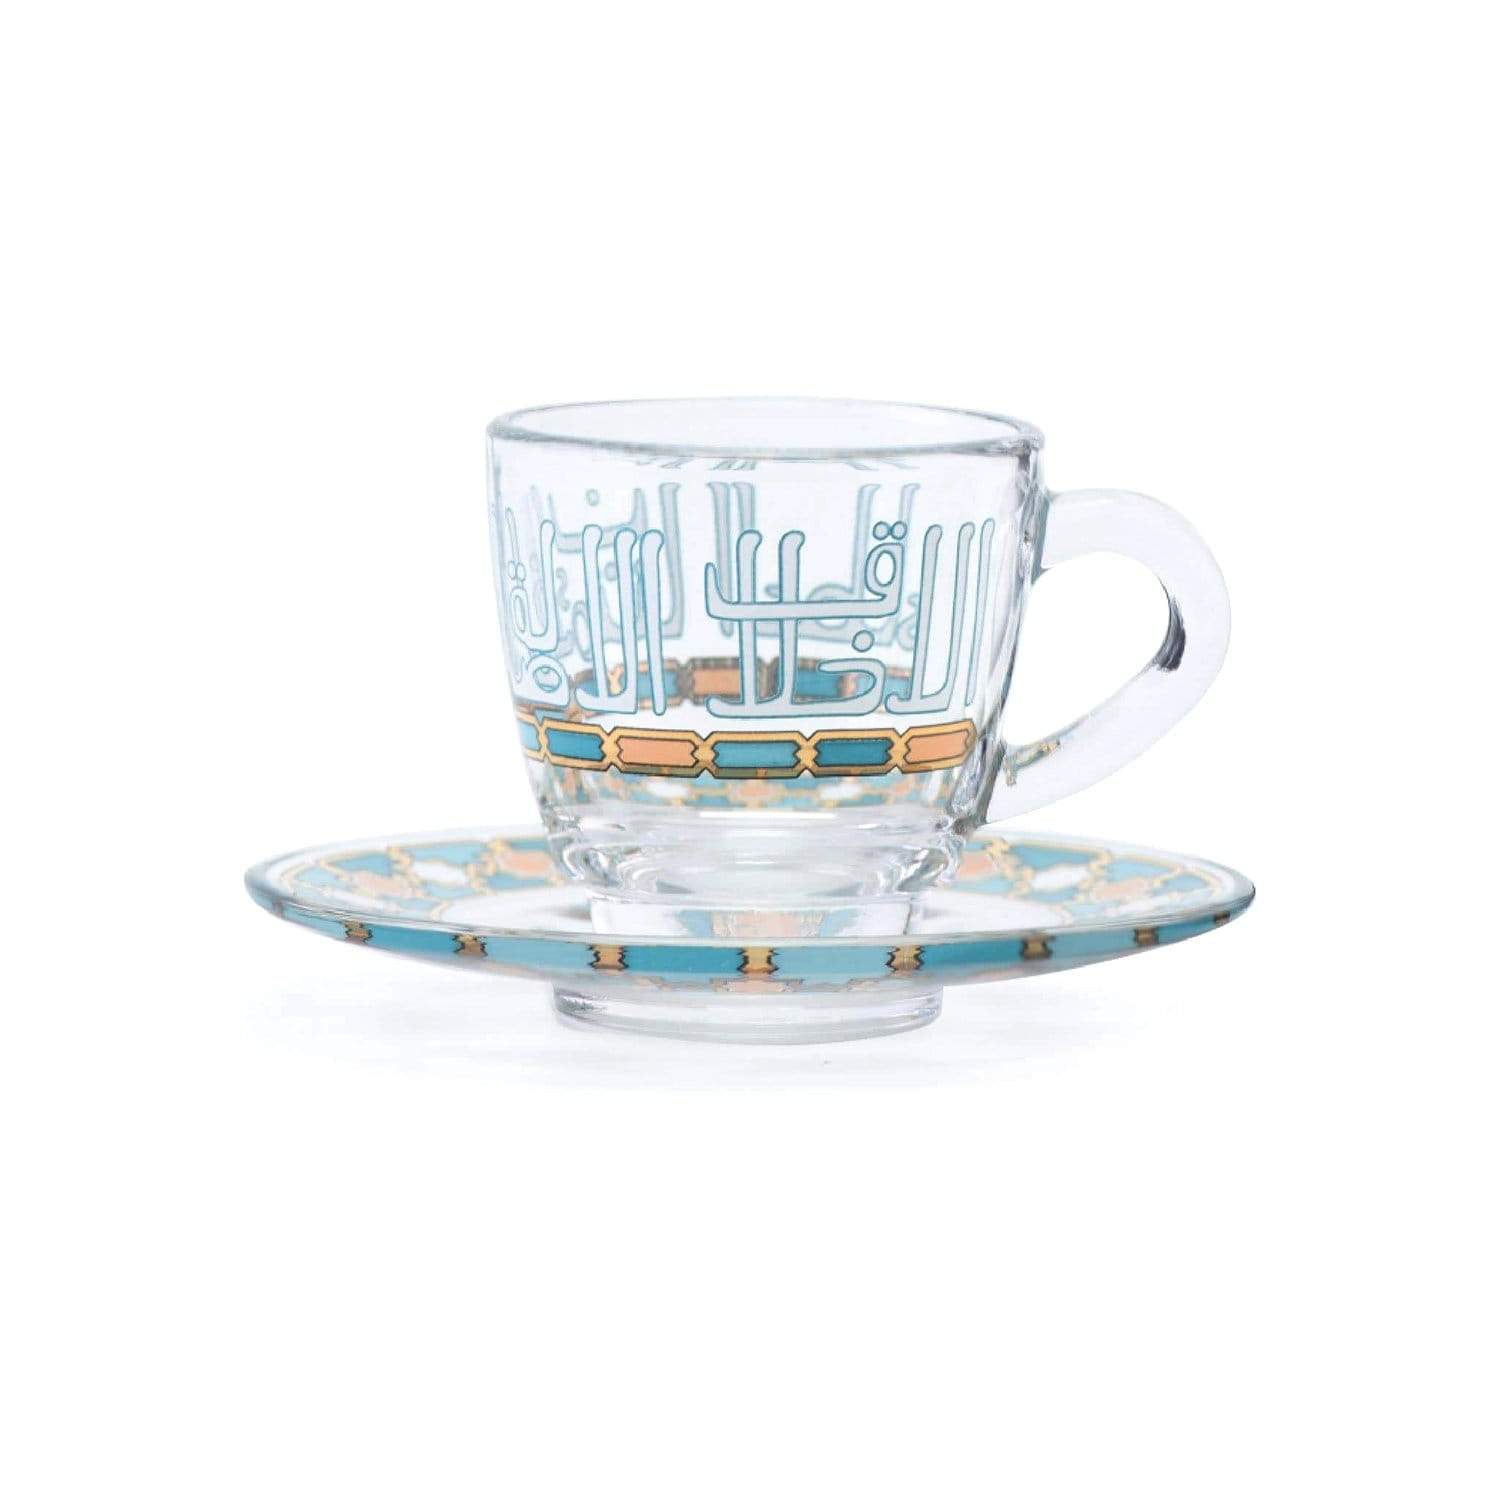 Dimlaj Asala Coffee Cup and Saucer Set - Clear, Gold and Green, 12 Pieces - 46711 - Jashanmal Home